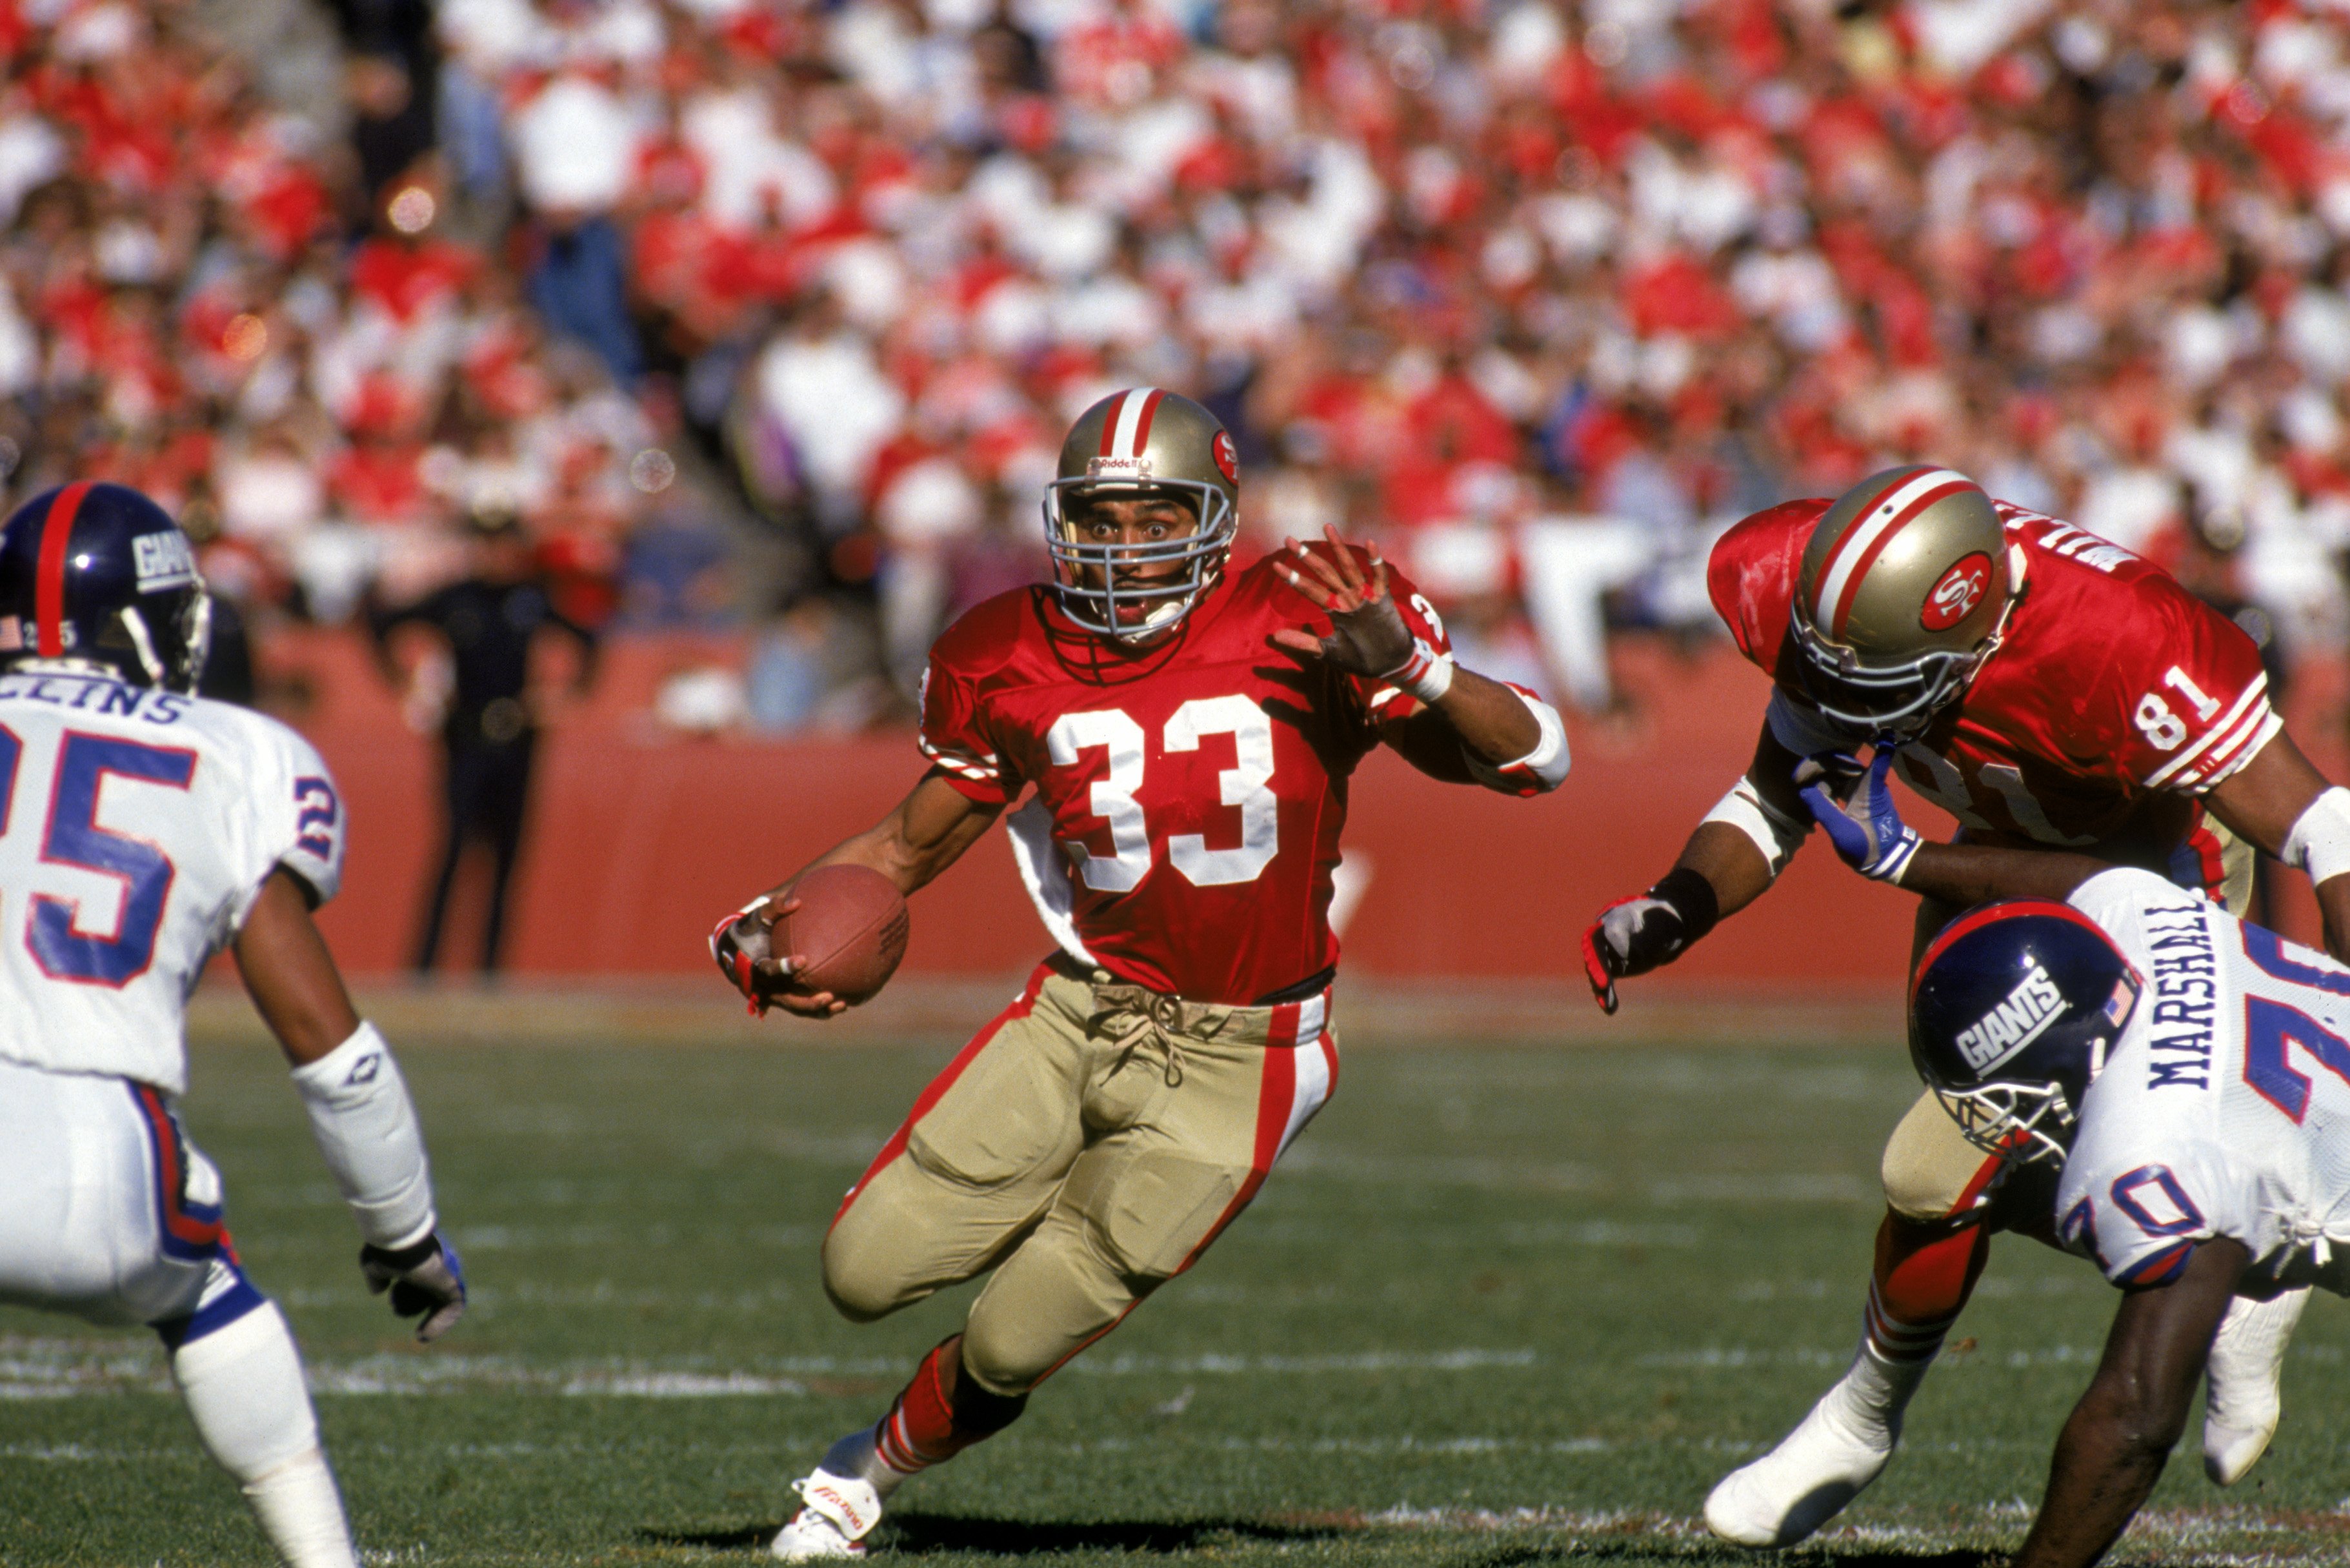 Running back Roger Craig #33 of the San Francisco 49ers looks for room to run during the 1990 NFC Championship game against the New York Giants at Candlestick Park on January 20, 1991 in San Francisco, California. The Giants won 15-13.